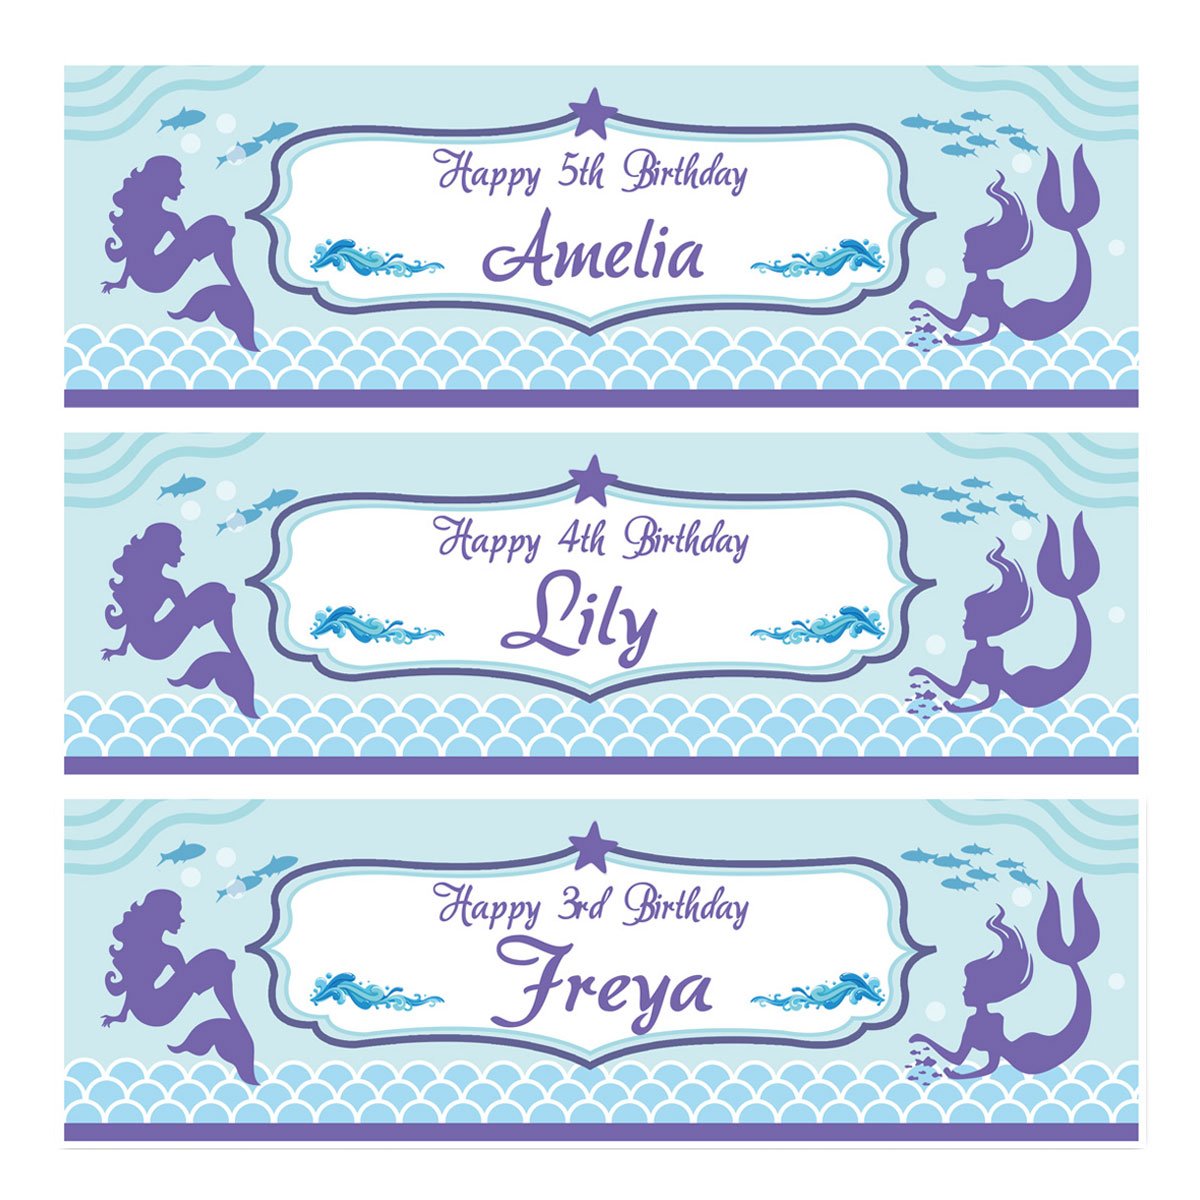 mermaid-birthday-banner-personalised-2-pieces-from-4-99-free-post